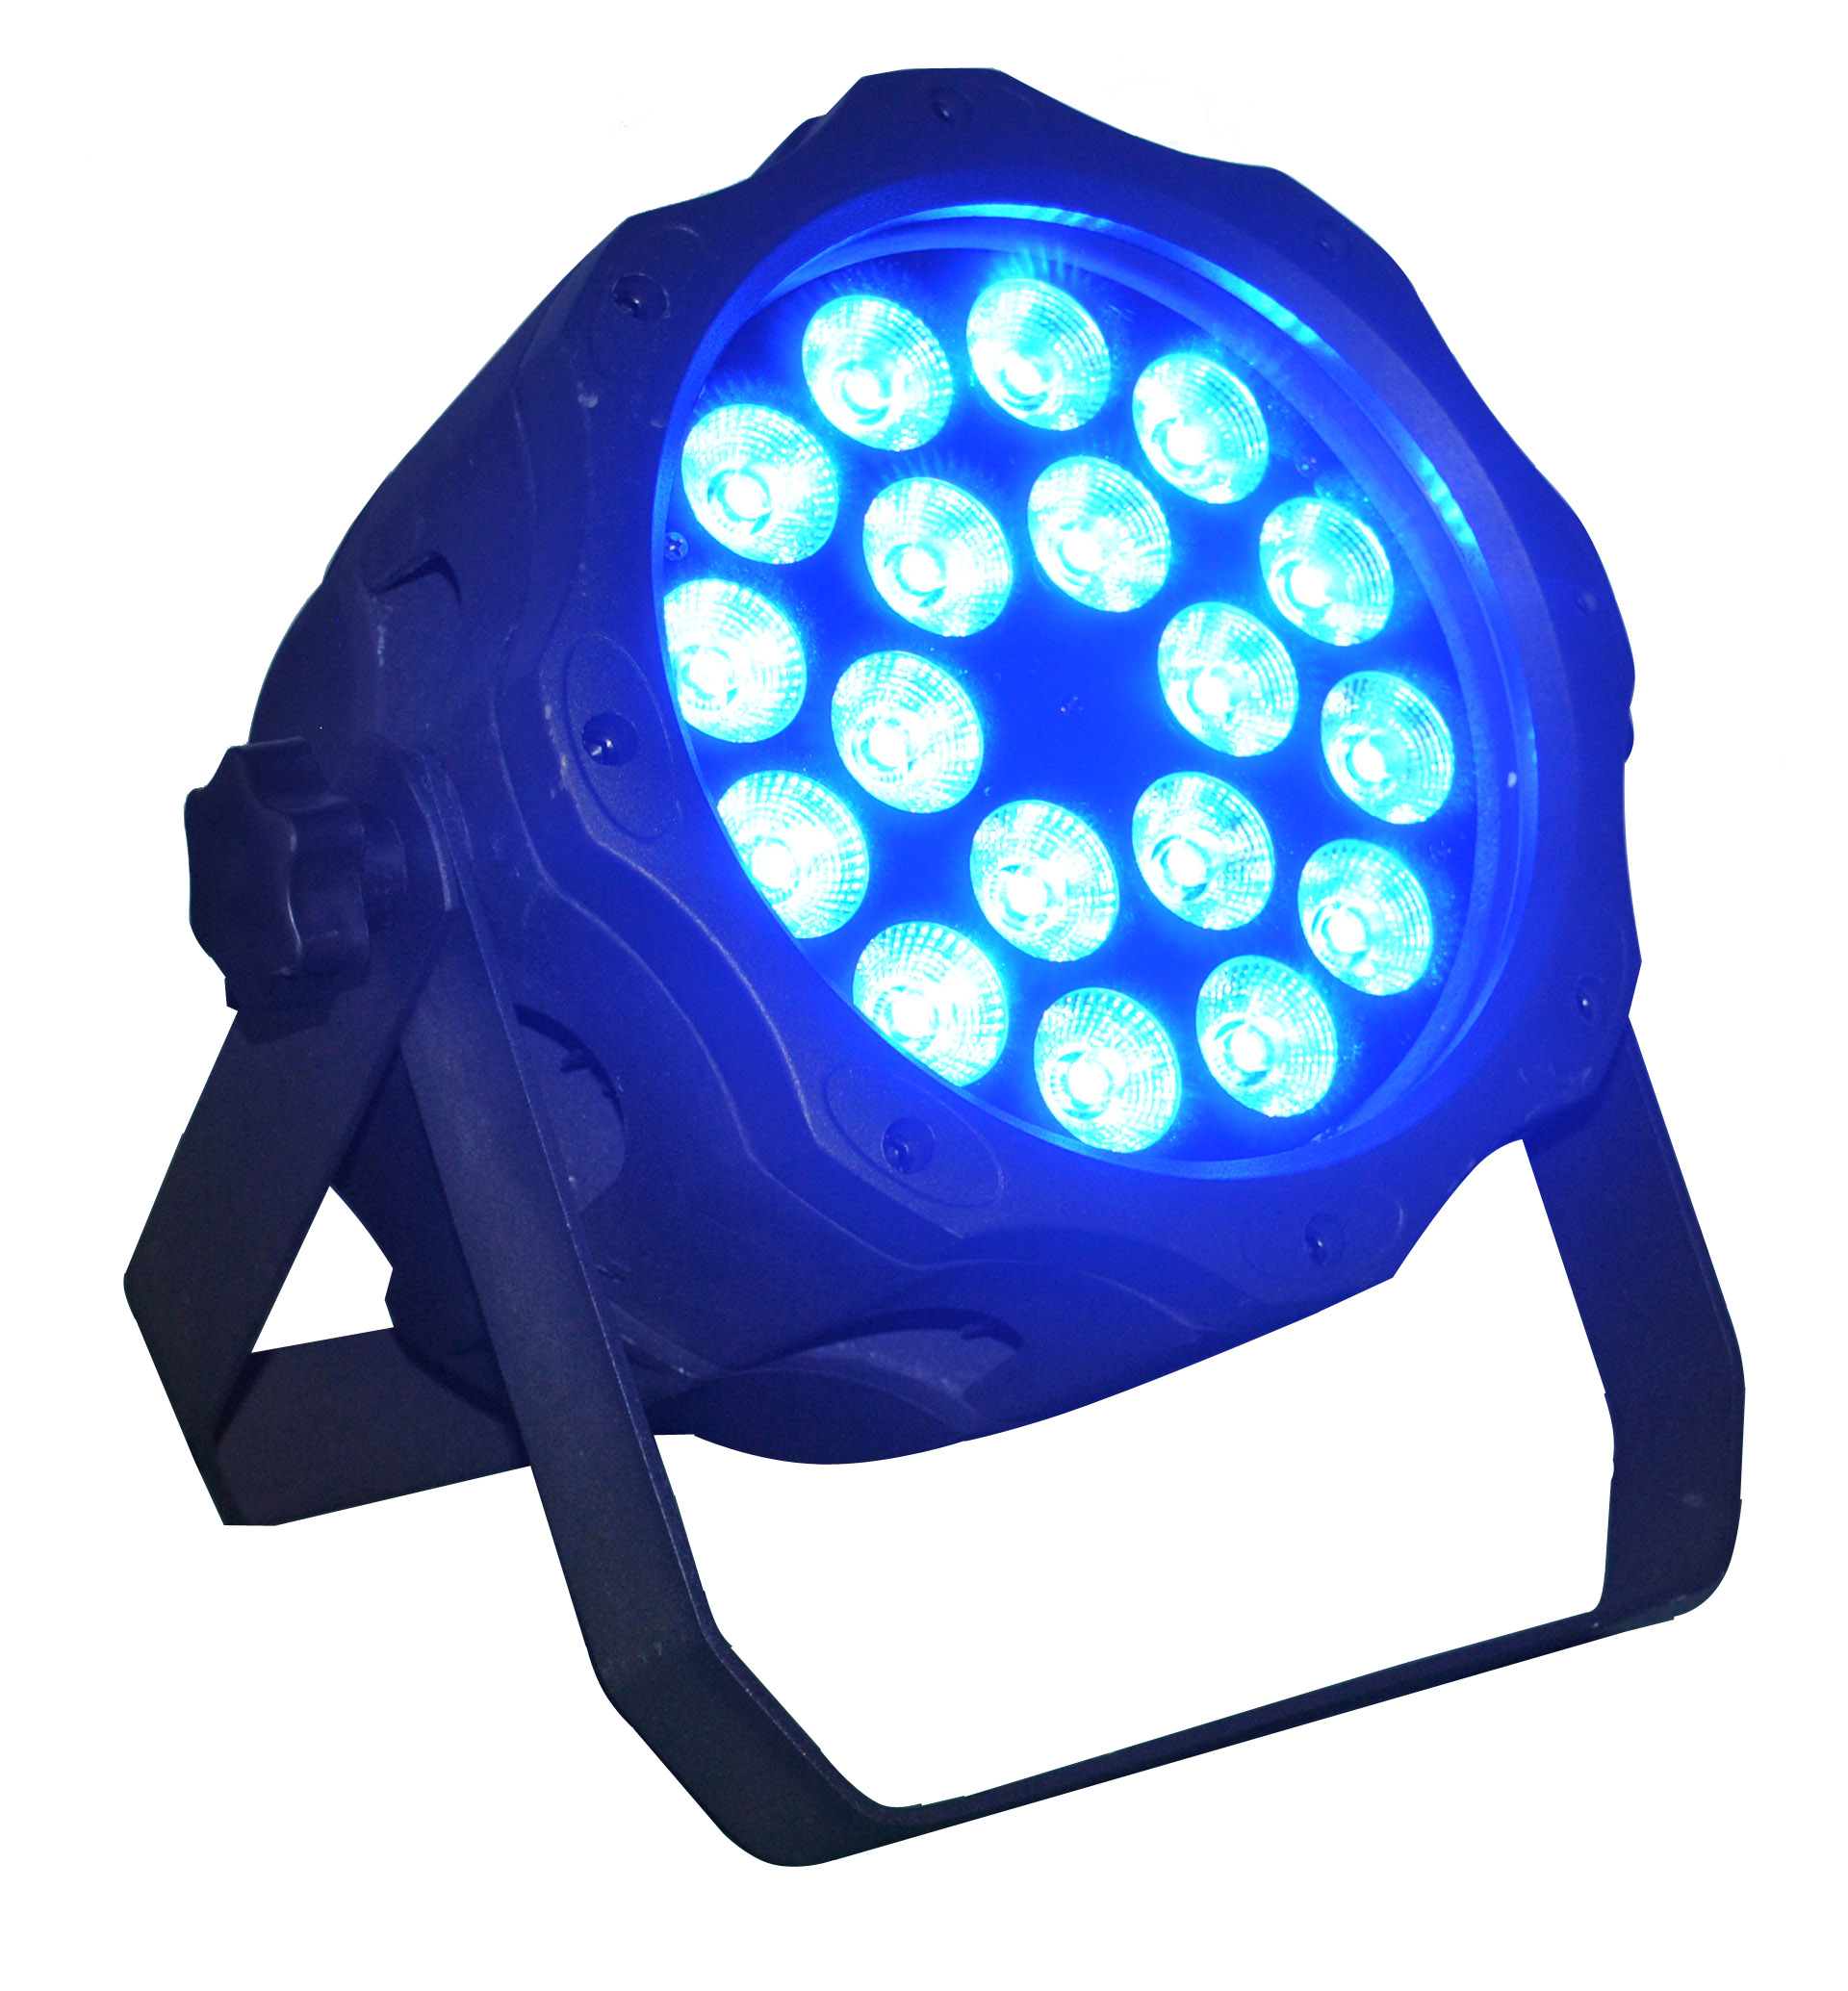 Outdoor 18X18W 6in1 Led Par Can Light HS-P64-1818Out - Led stage light - 1